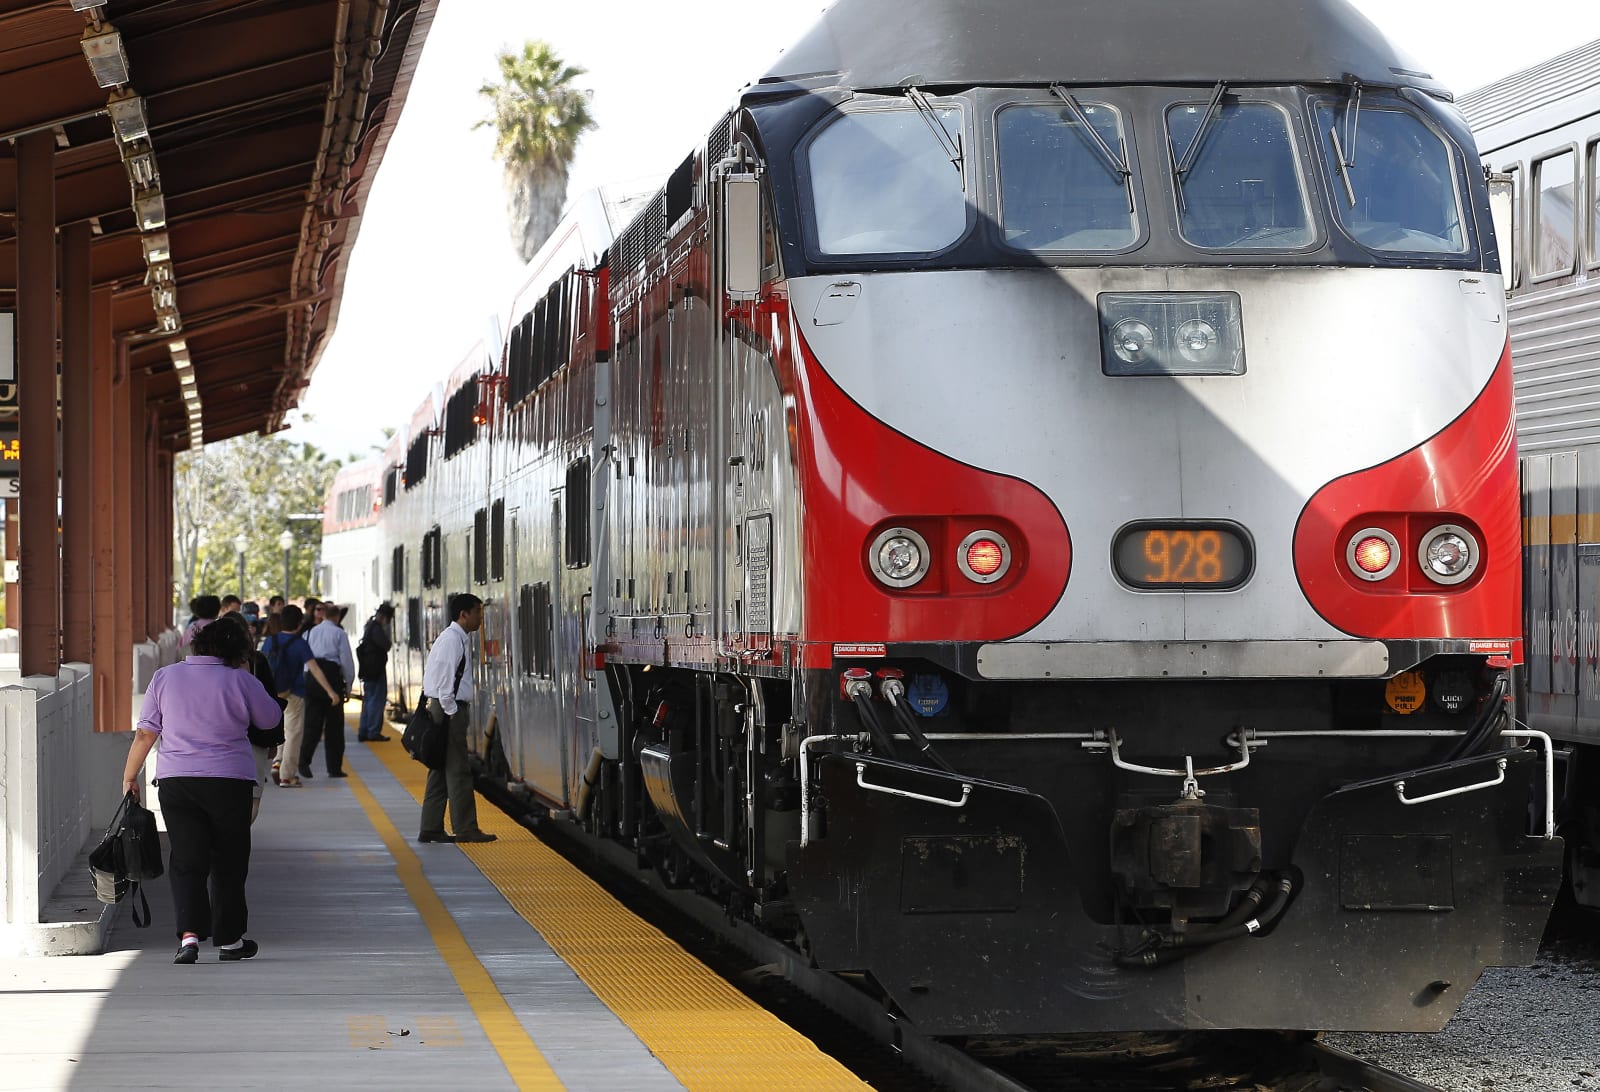 Caltrain will finally go electric thanks to FTA funding – Electricals ...